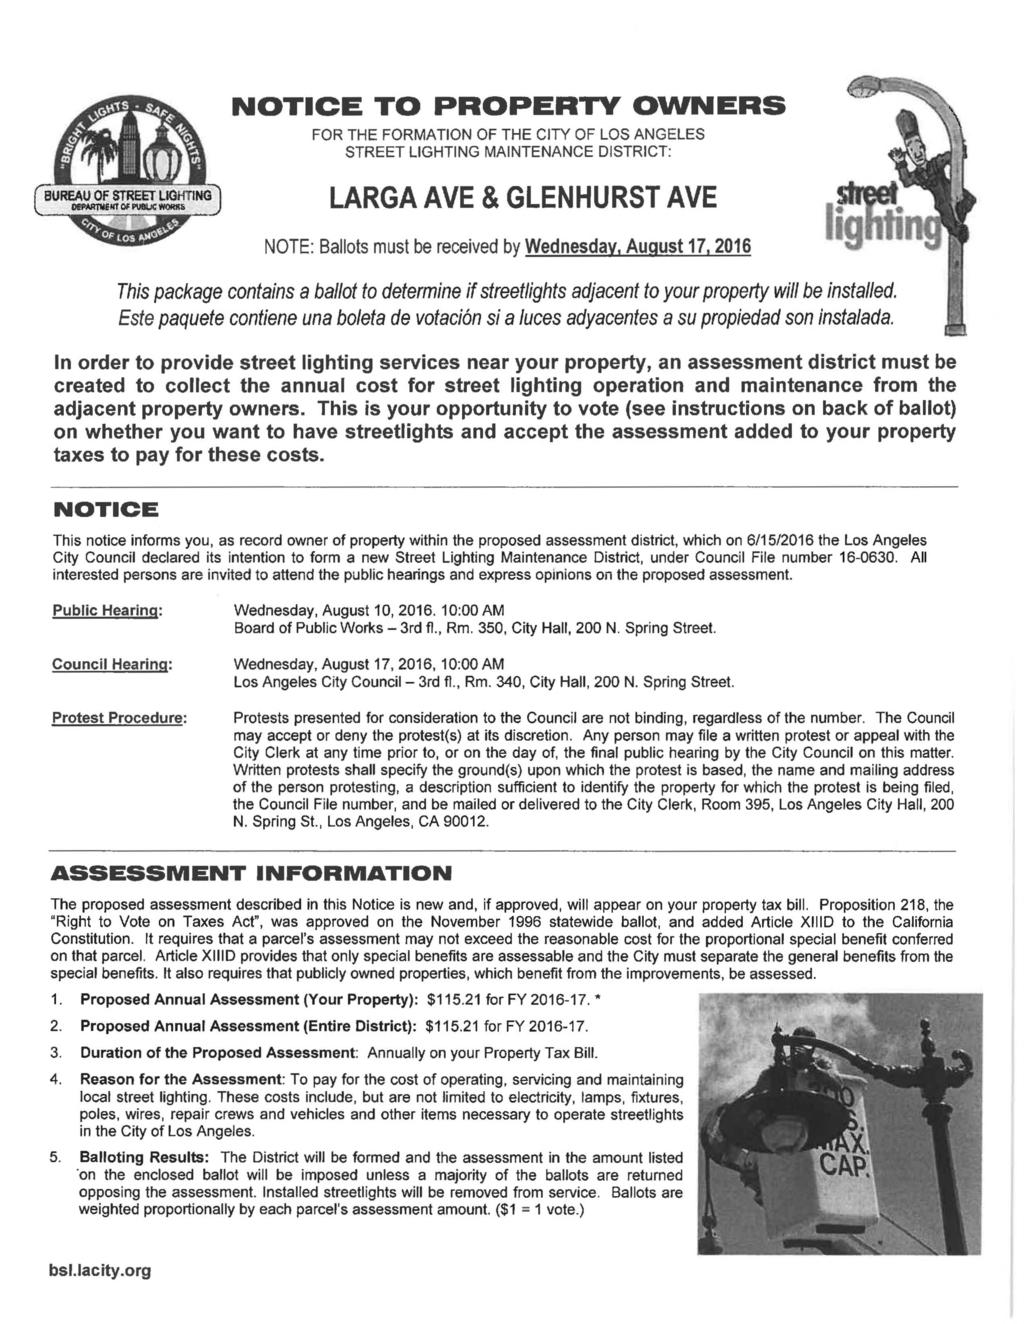 NOTICE TO PROPERTY OWNERS BUREAU OF STREET LIGHTING oepafrrasin Of public works FOR THE FORMATION OF THE CITY OF LOS ANGELES STREET LIGHTING MAINTENANCE DISTRICT: LARGA AVE & GLENHURST AVE NOTE: